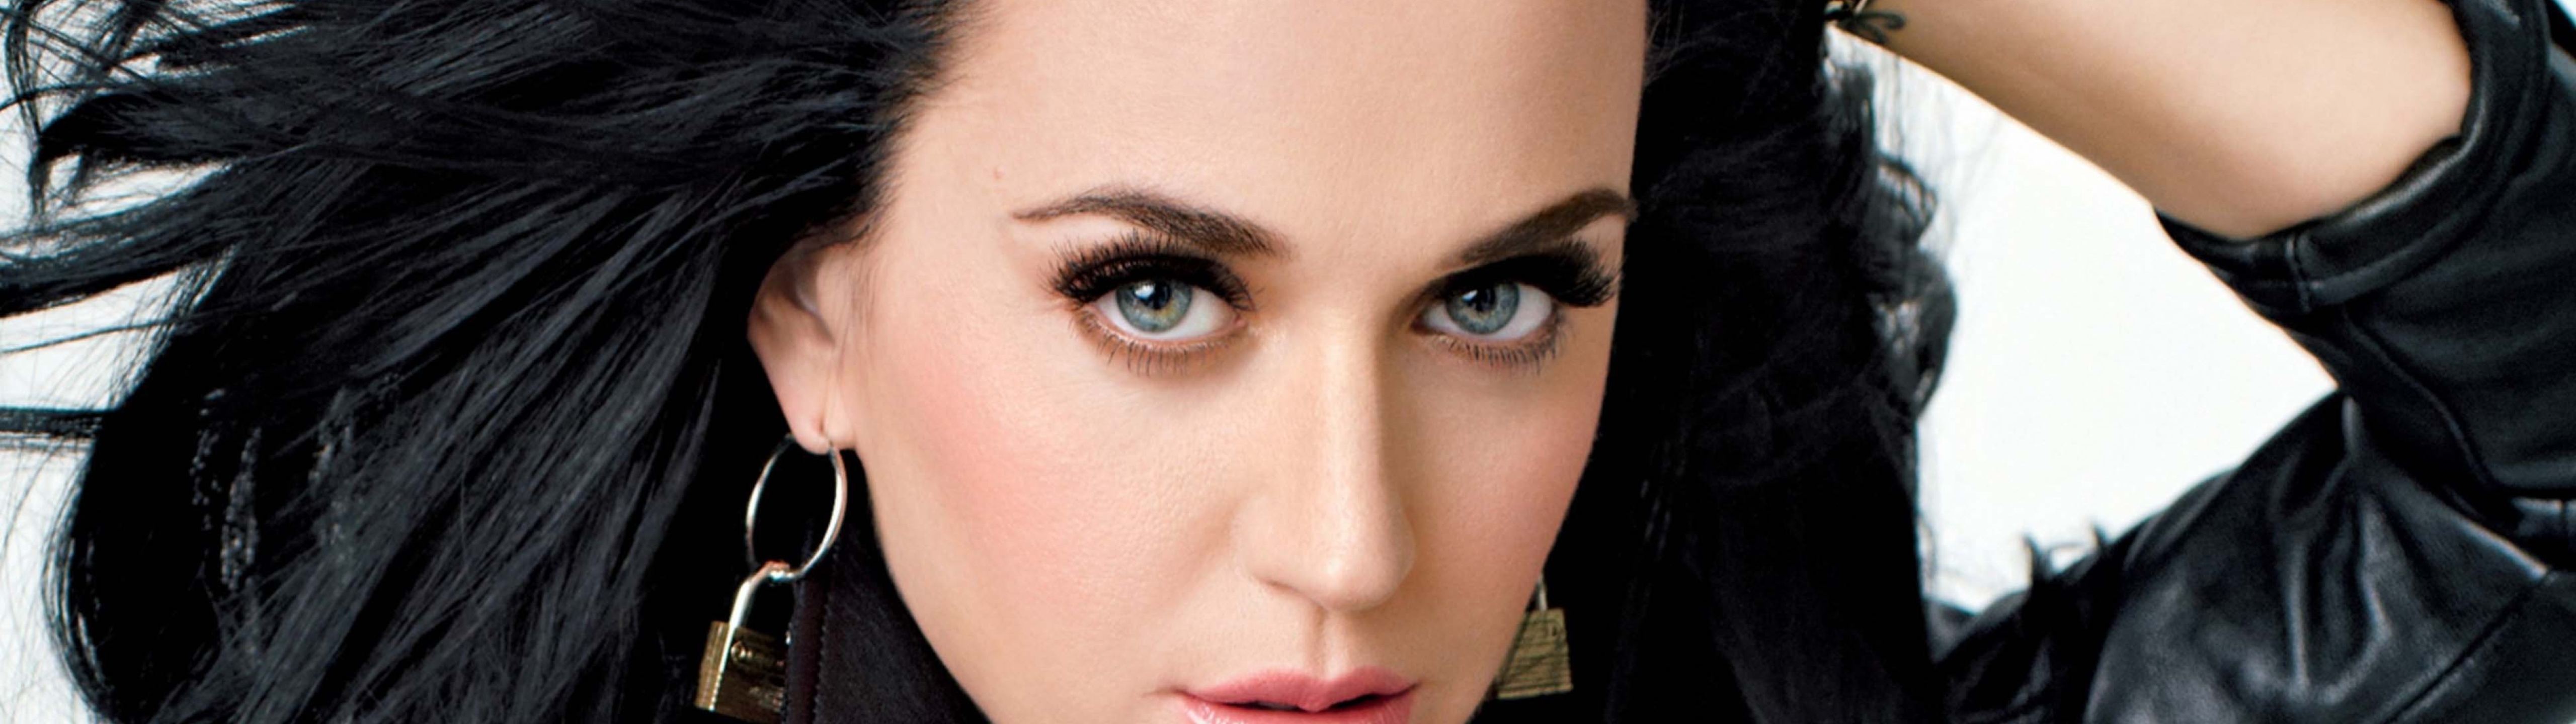 5120x1440 Resolution Katy Perry Face And Eyes 5120x1440 Resolution ...